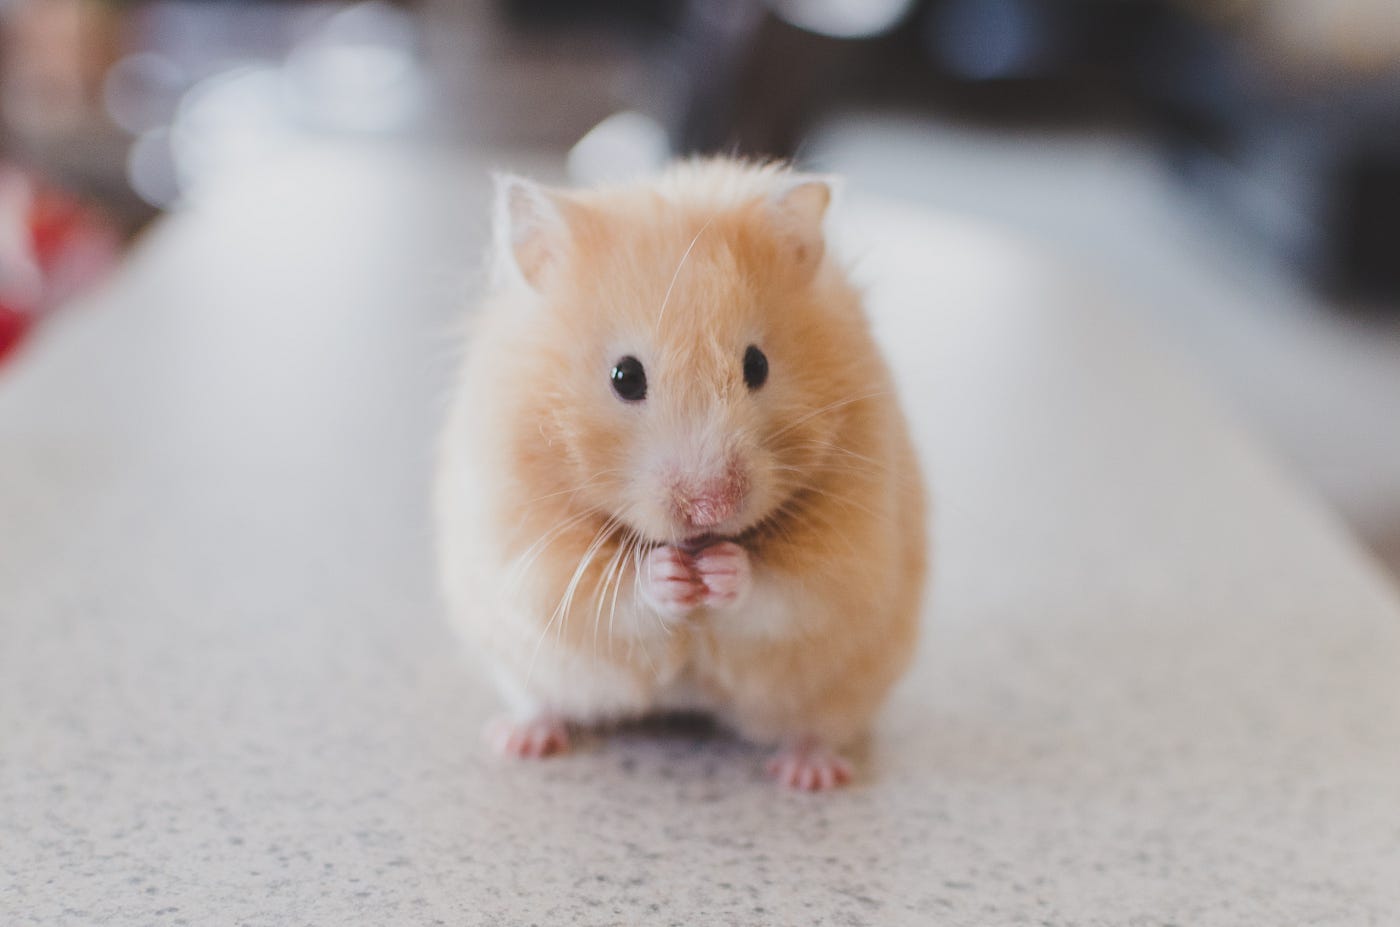 A small golden-colored mice faces us, empty hands raised to his mouth. Recent mice research suggests that antibiotic-induced harm to the microbiome adversely affects athletic performance.